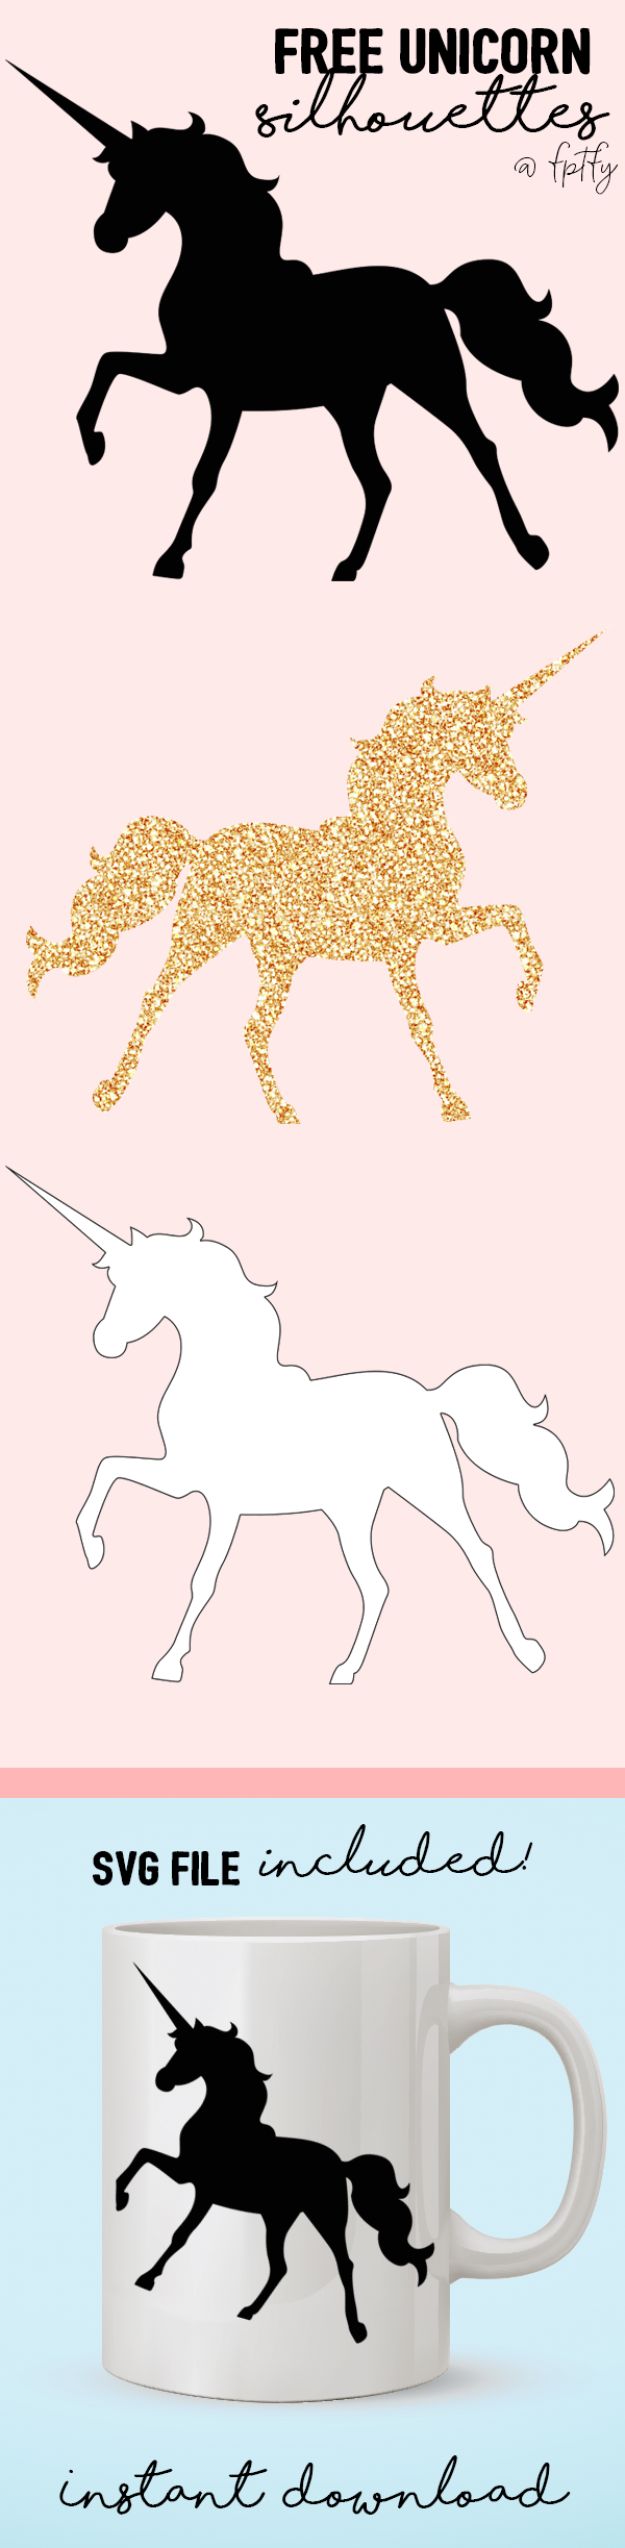 DIY Ideas With Unicorns - Unicorn Silhouettes - Cute and Easy DIY Projects for Unicorn Lovers - Wall and Home Decor Projects, Things To Make and Sell on Etsy - Quick Gifts to Make for Friends and Family - Homemade No Sew Projects and Pillows - Fun Jewelry, Desk Decor Cool Clothes and Accessories